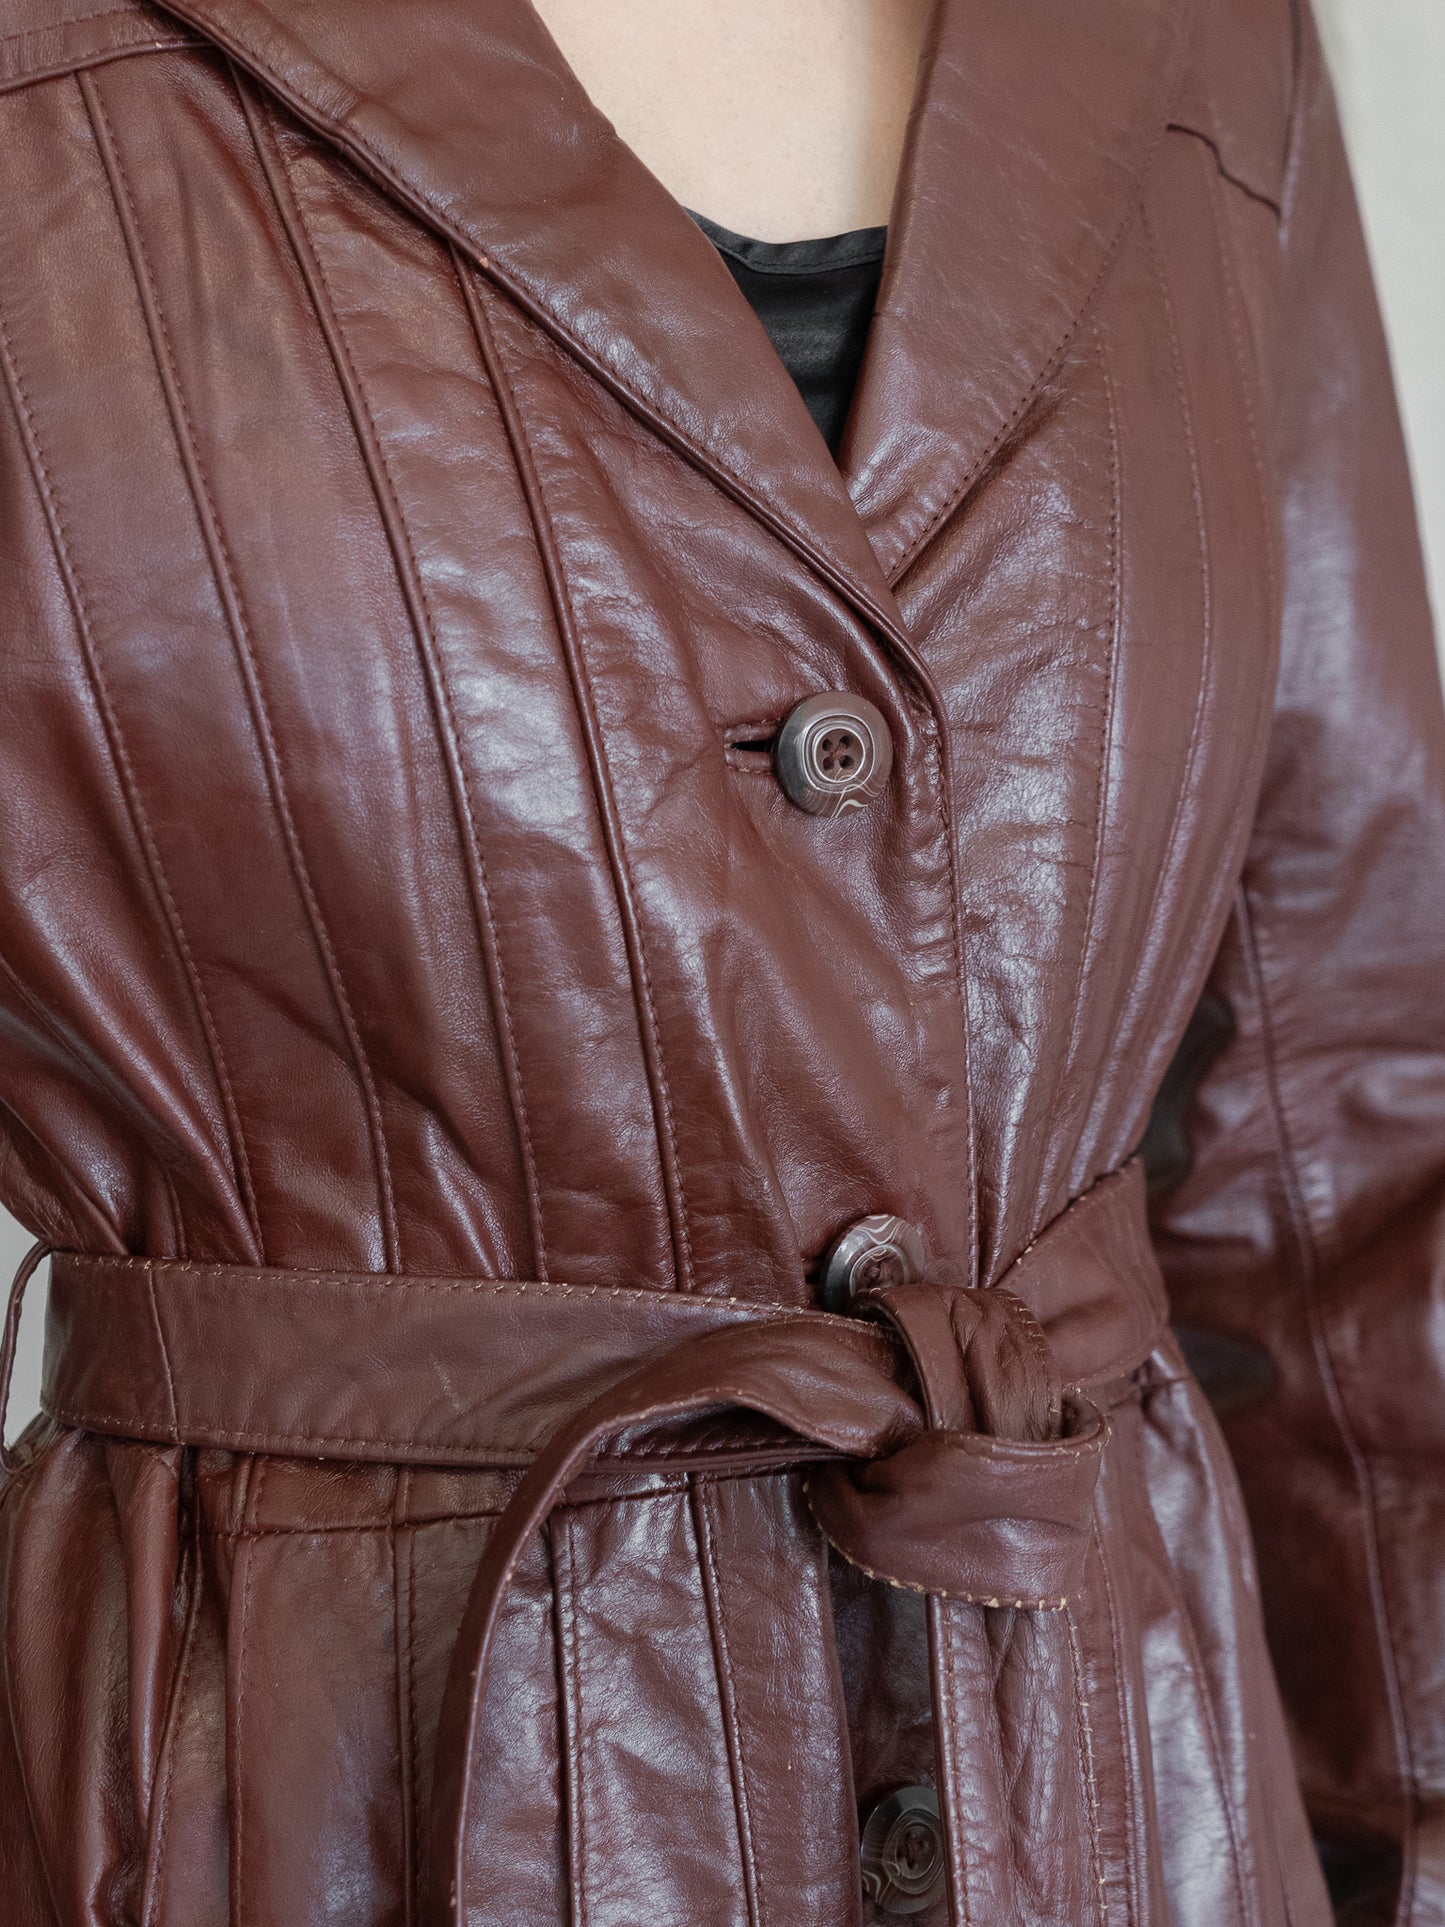 Vintage 70's Burgundy Long Leather Single Breasted Trench Coat (M)